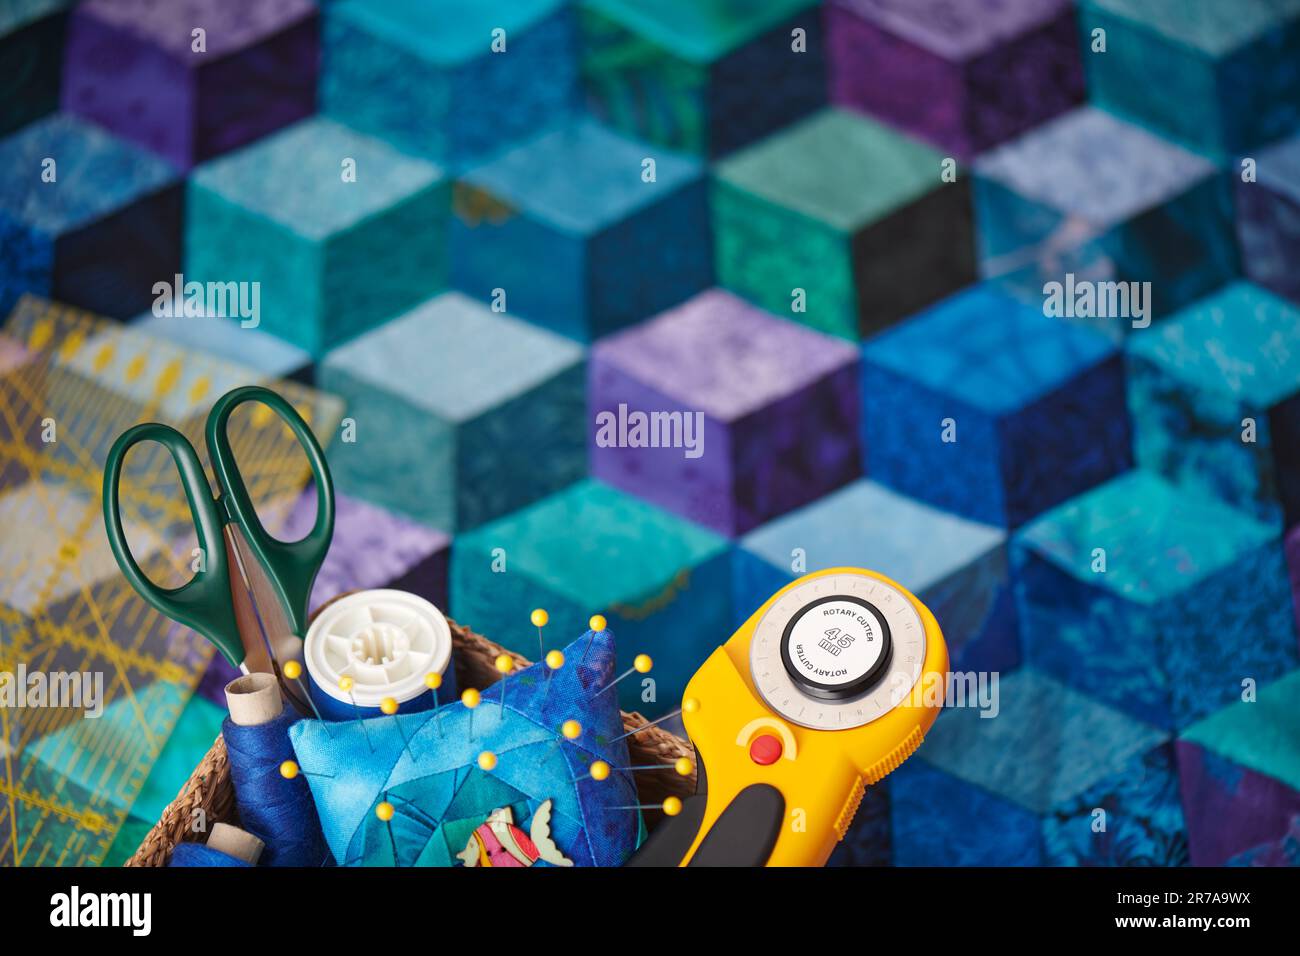 Quilting accessories on the background of a tumbling blocks quilt Stock Photo